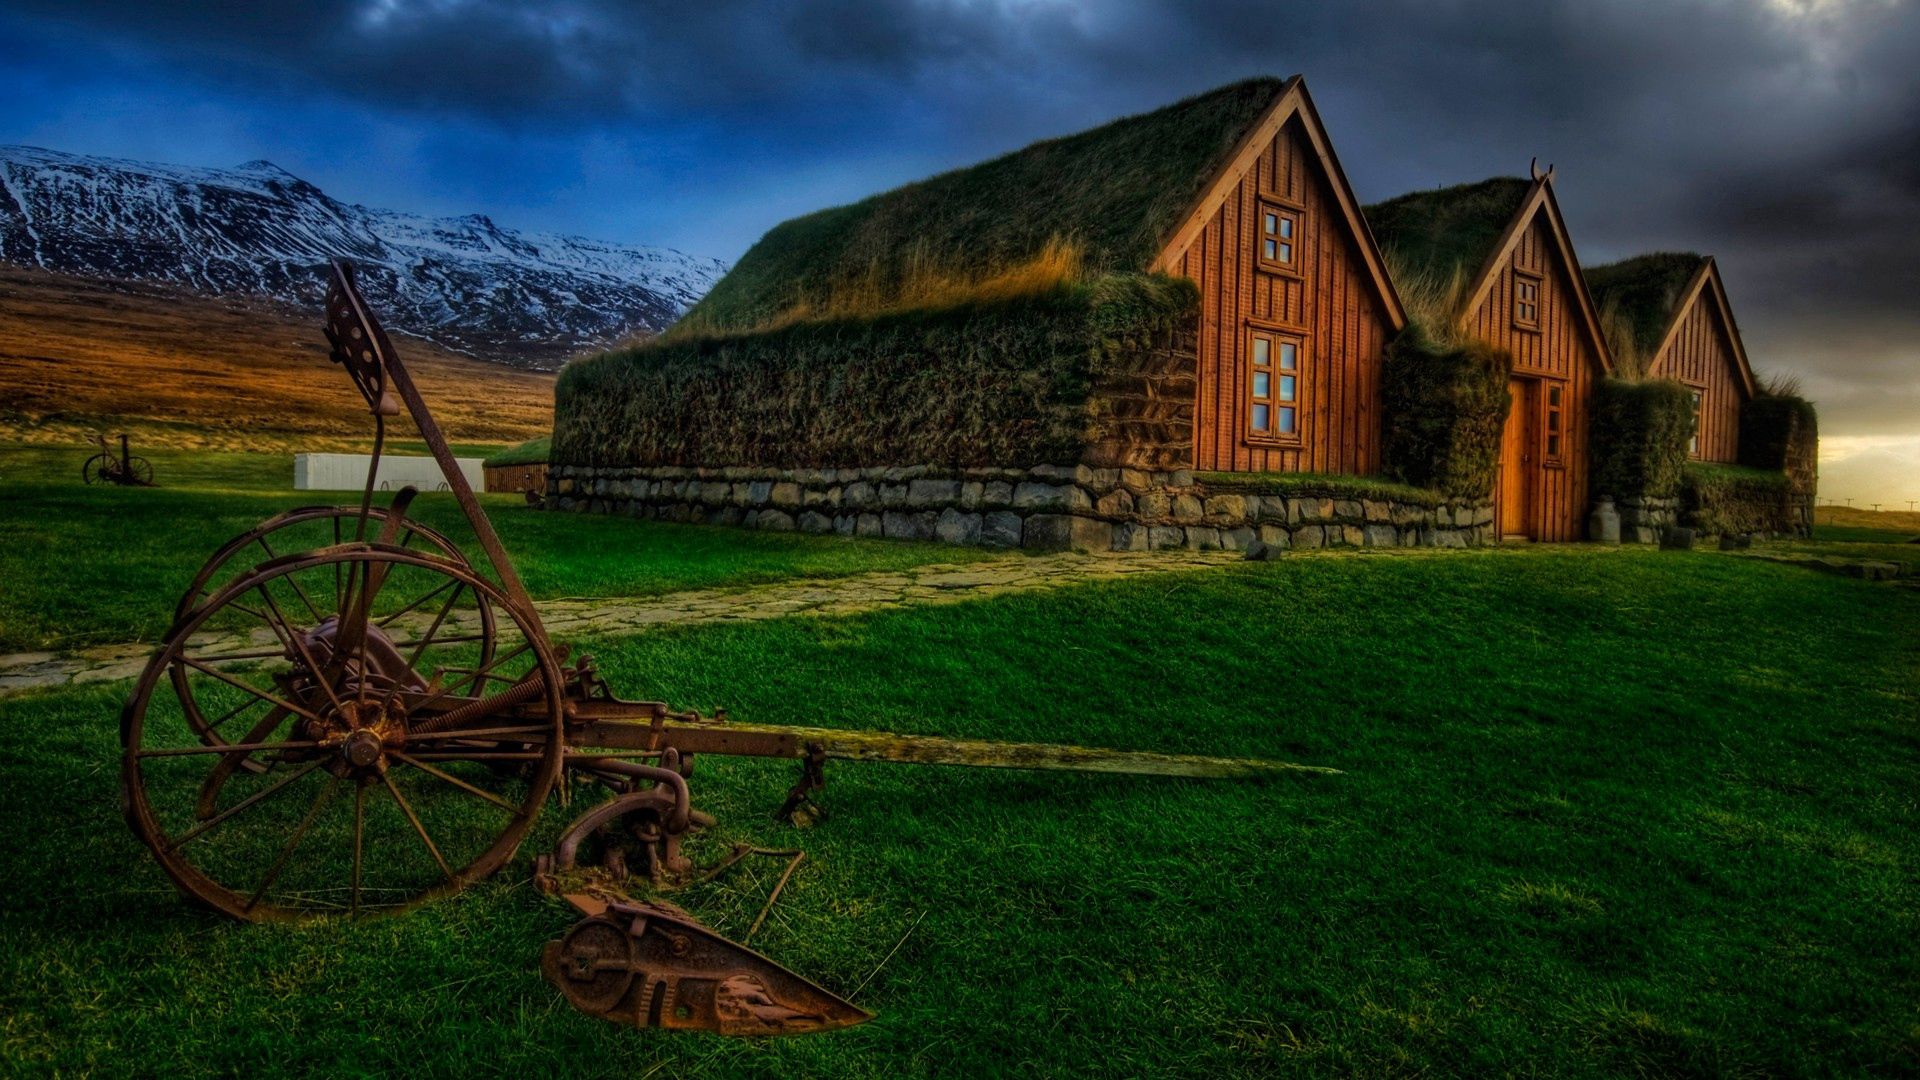 cities, houses, grass, old, country, craft